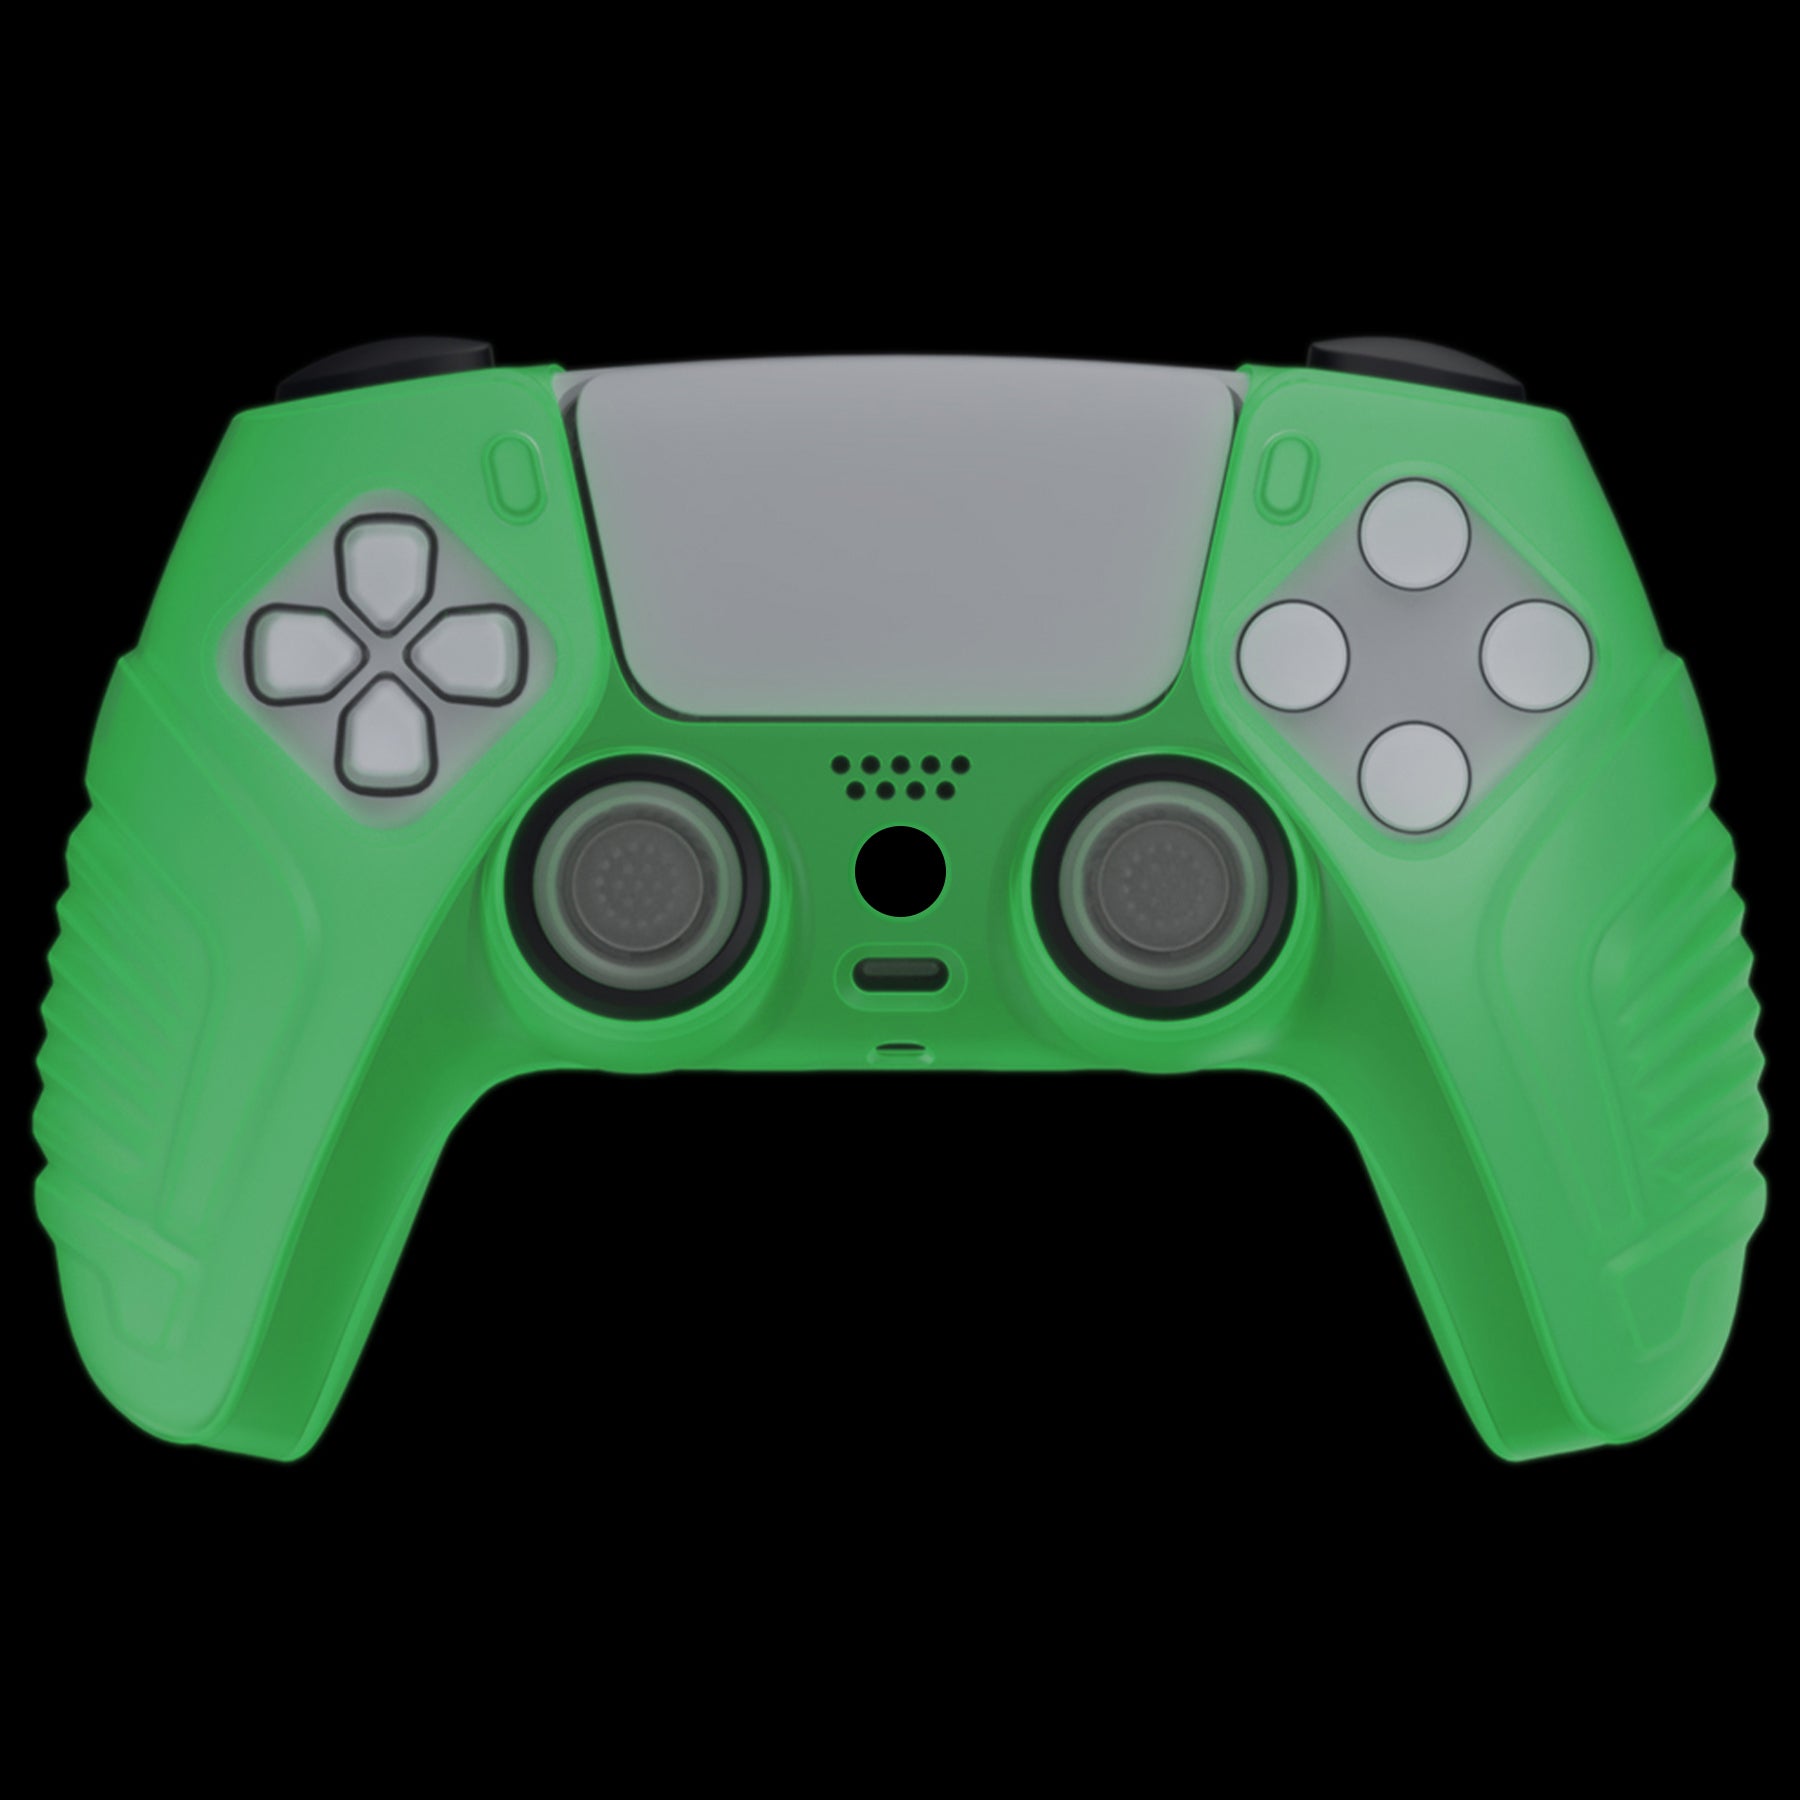 PlayVital Raging Warrior Edition Anti-slip Silicone Cover Skin with Thumbstick Caps for PS5 Wireless Controller - Glow in Dark - Green - KZPF008 PlayVital